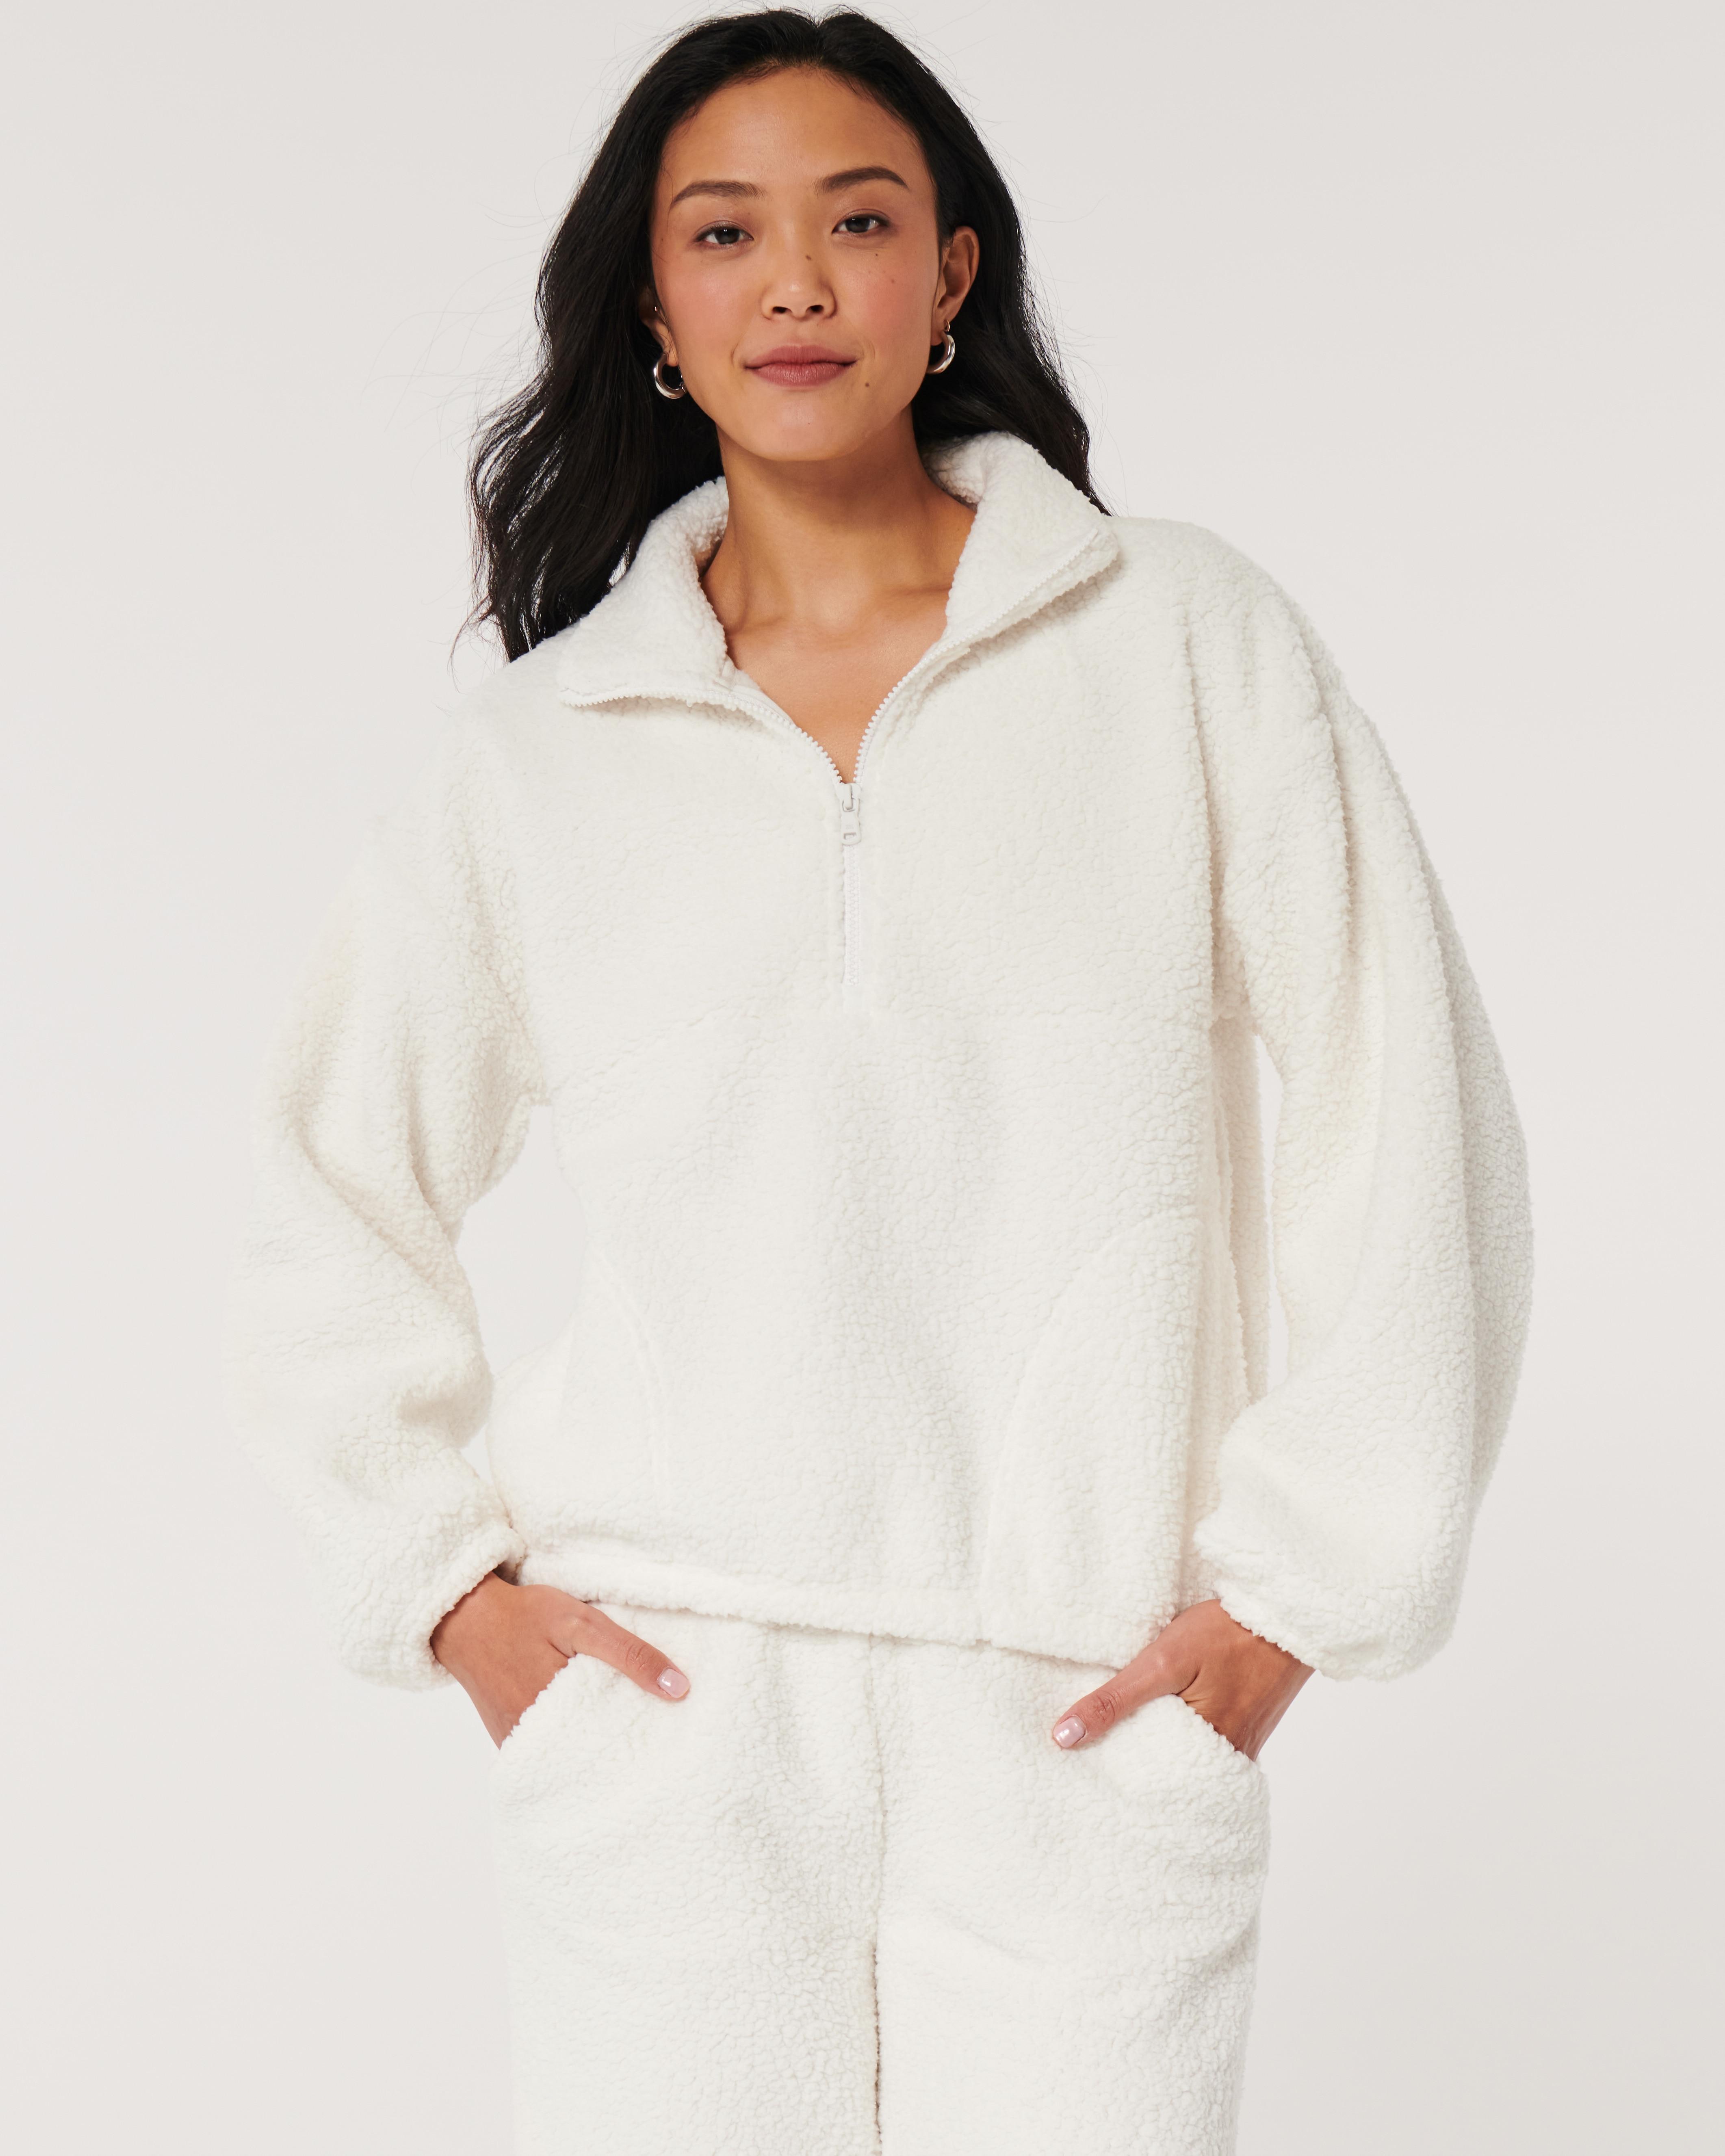 Hollister Gilly Hicks Sherpa Quarter-zip Pullover in White